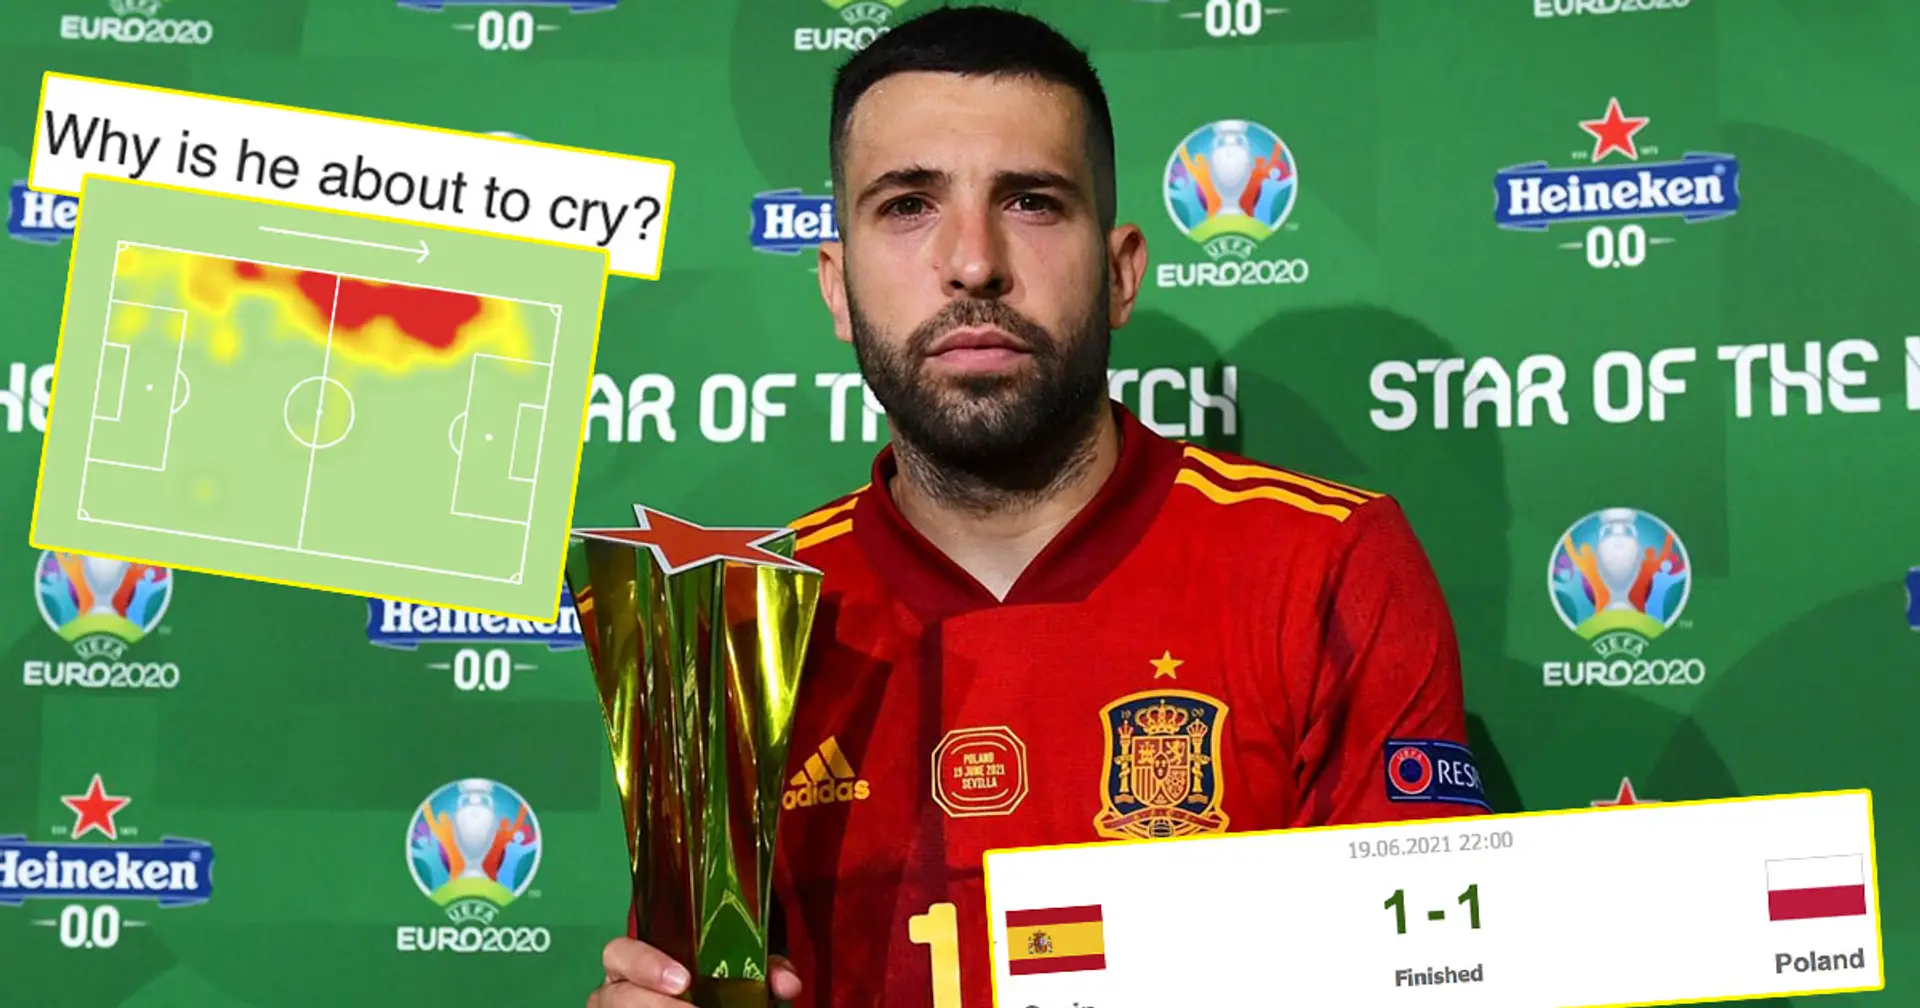 'Look at him, he's about to cry because his striker is Morata': Fans react as Alba takes home Star of the Match award